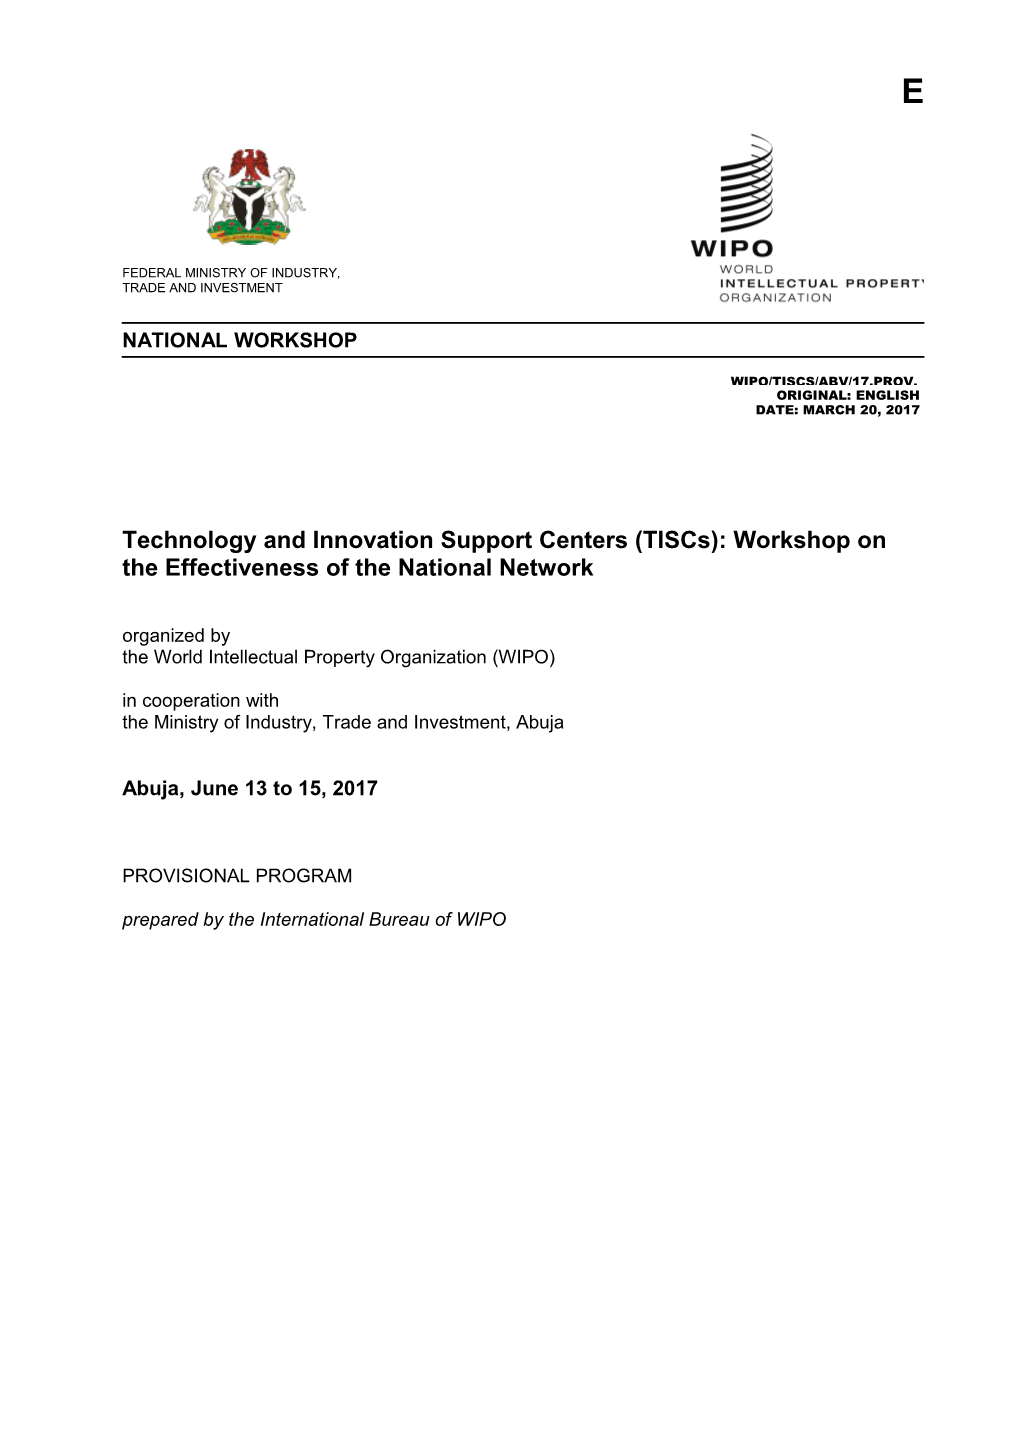 Technology and Innovation Support Centers (Tiscs): Workshop on the Effectiveness of The